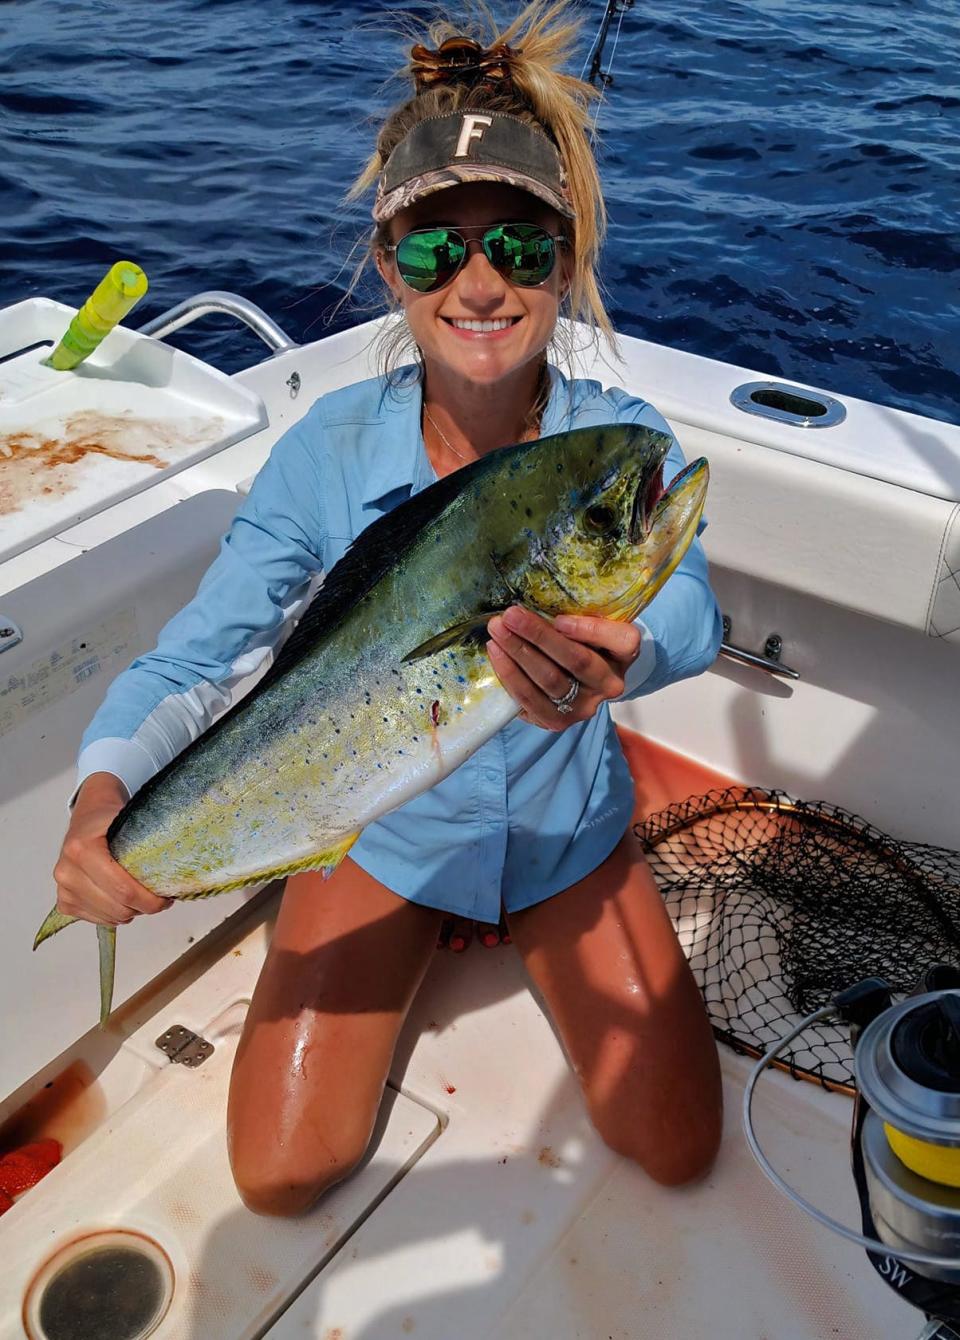 Amanda Holly, WFLA Tampa News Channel 8 Meteorologist, caught this mahi mahi on cut squid rigged on a jig head while fishing 40 miles offshore of Sarasota recently.